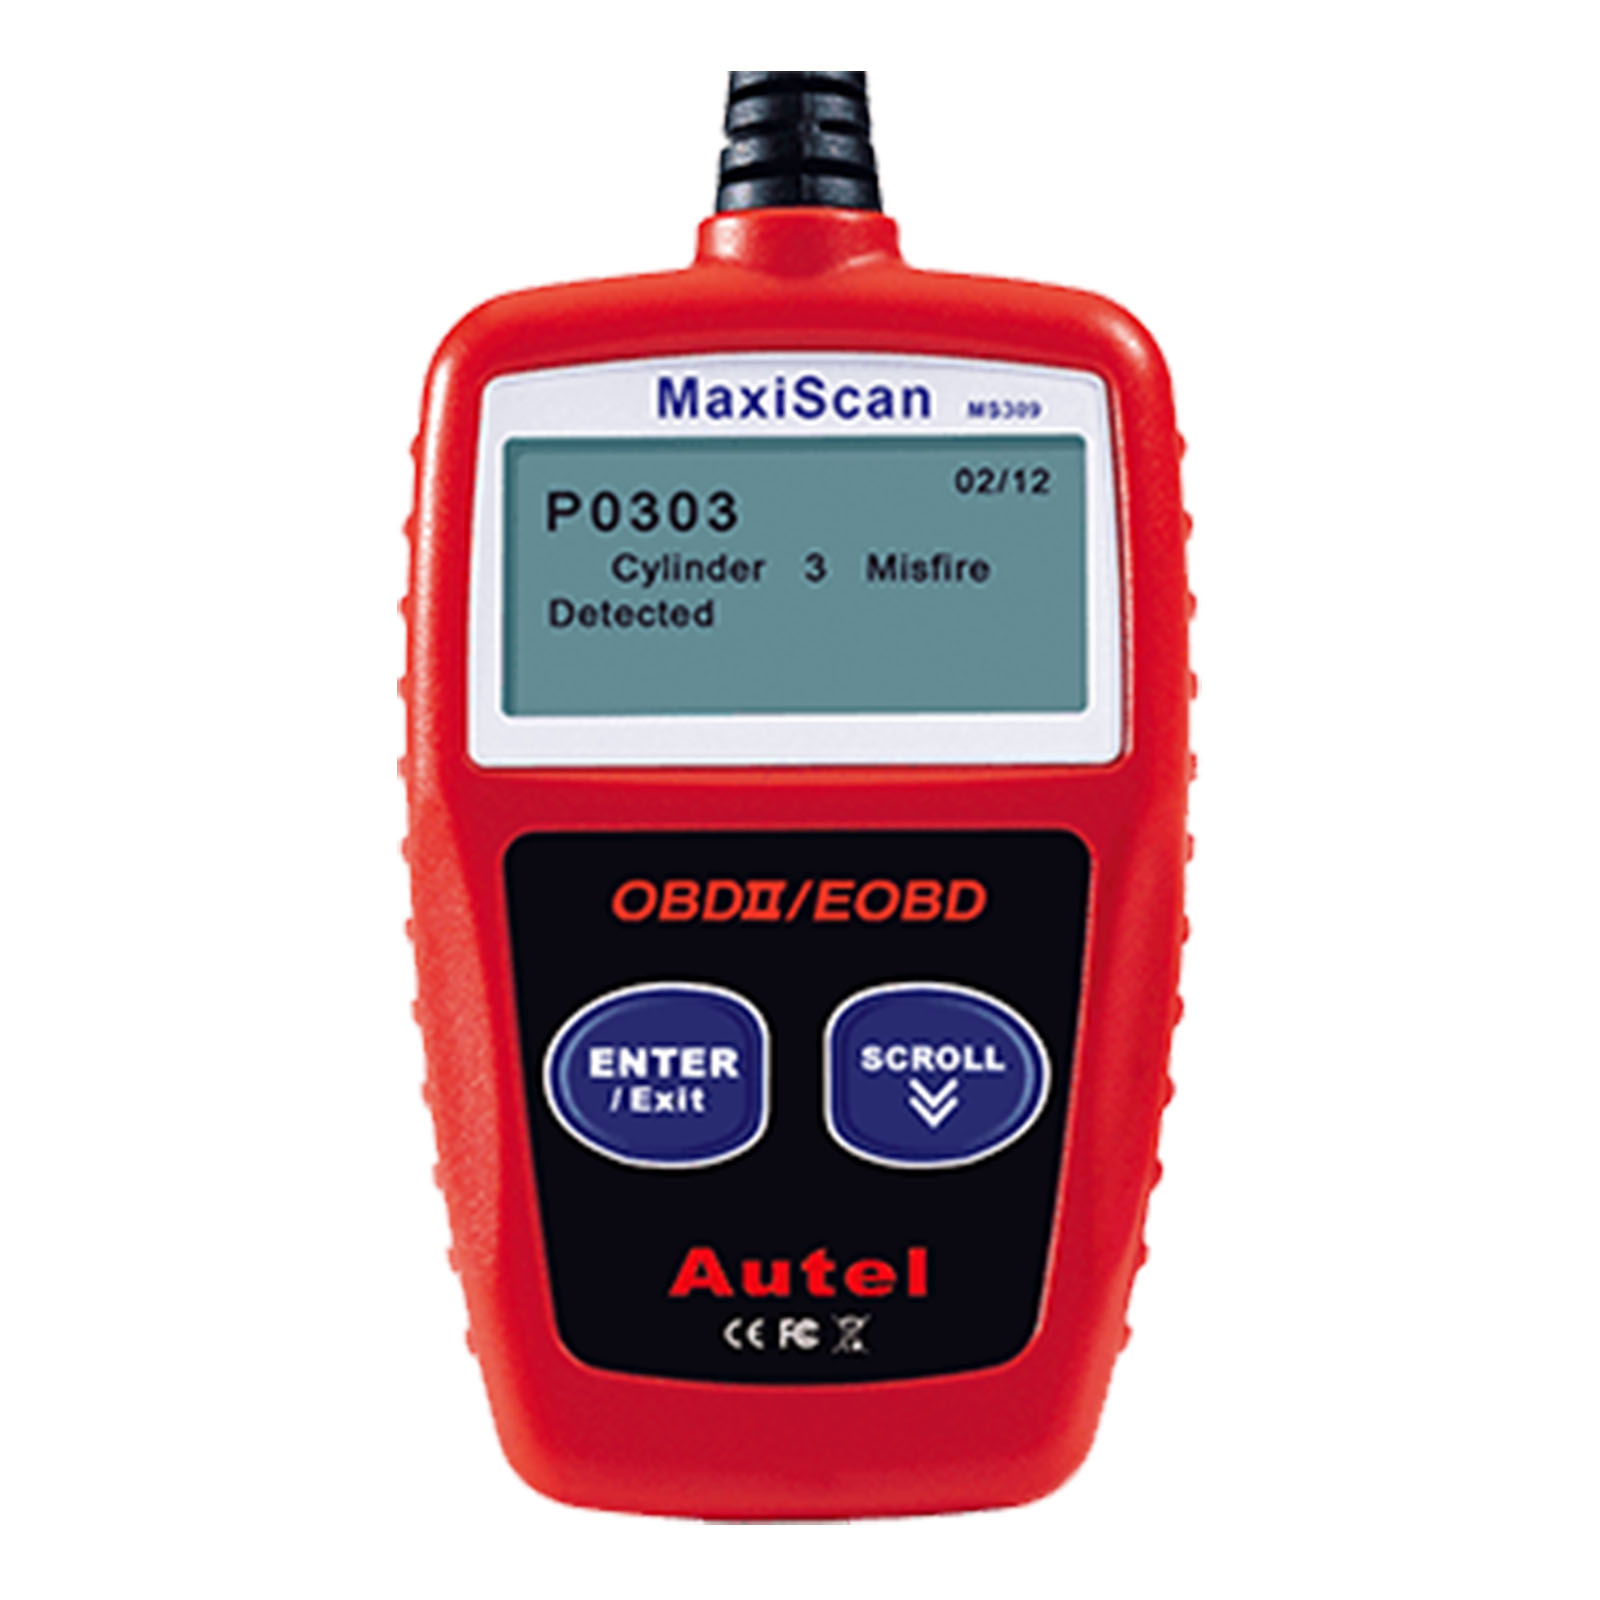 Autel MaxiScan MS309 OBD2 Check Engine Car Diagnostic Tools Code Reader Scanners 